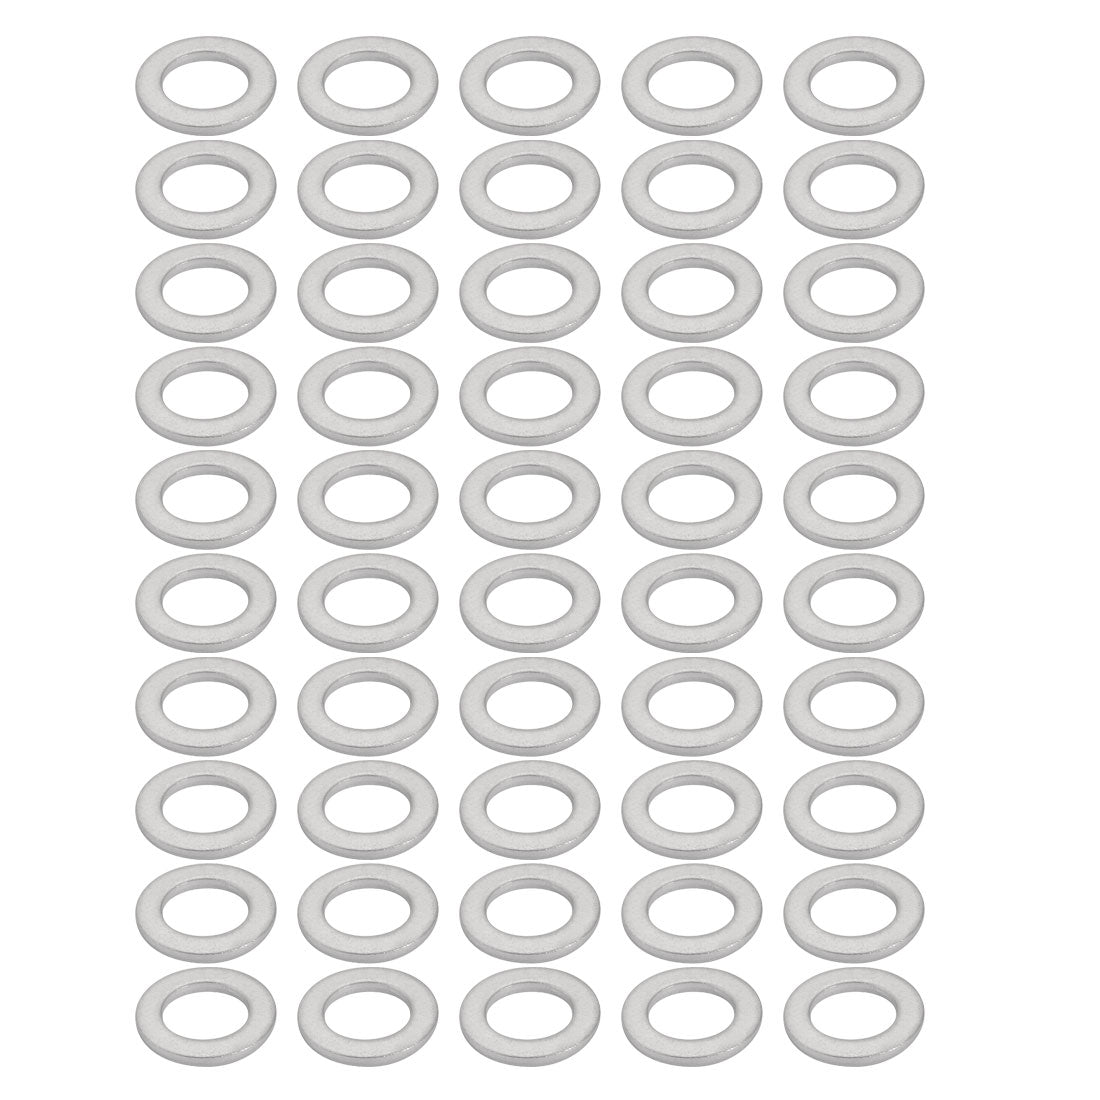 uxcell Uxcell 50Pcs 12mmx20mmx2mm Aluminum Motorcycle Hardware Drain Plug Washer